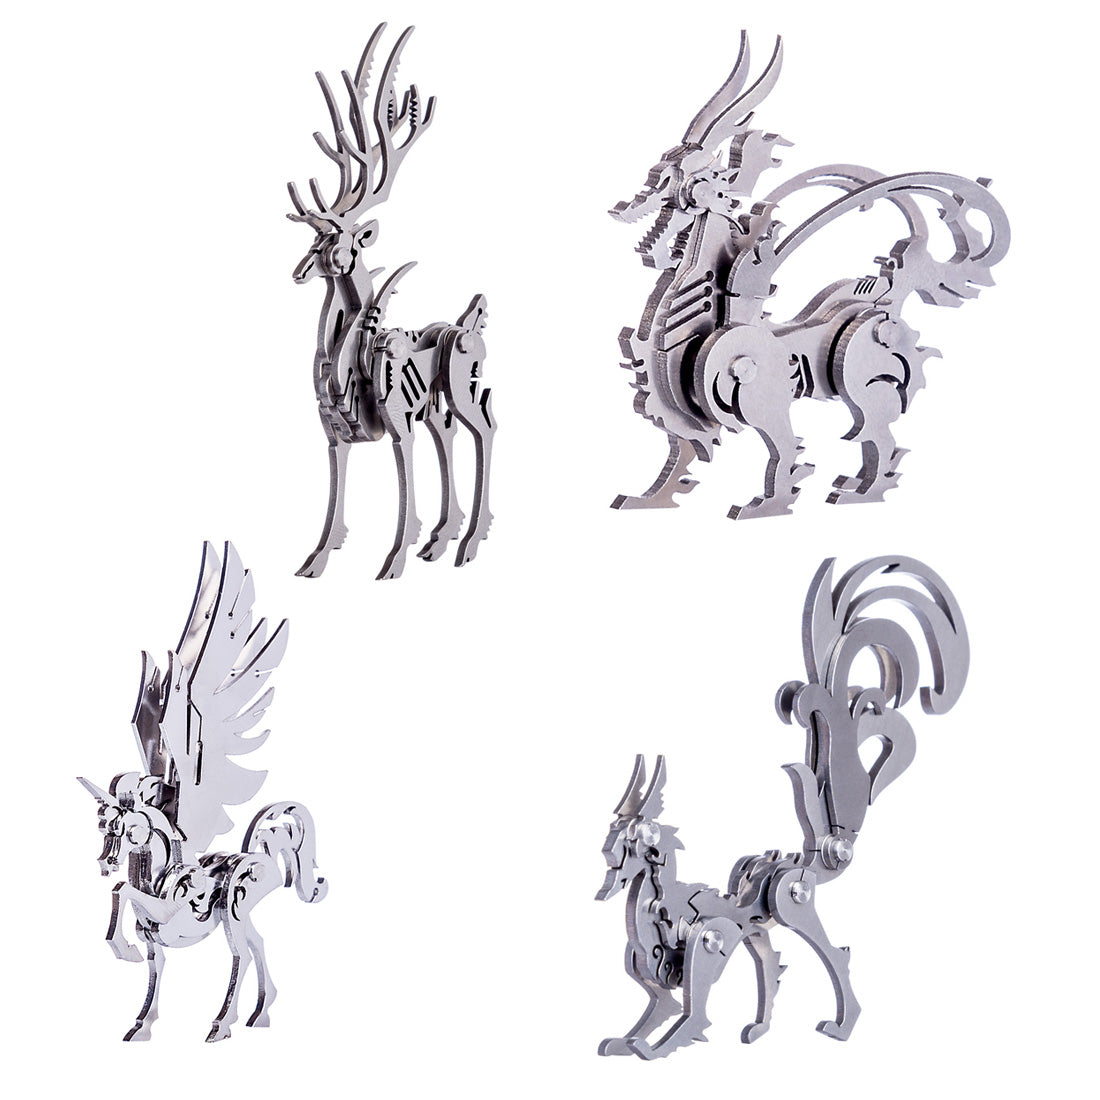 4PCS DIY 3D Assembly Stainless Steel Fox Elk Beast Unicorn Puzzle Toy Model